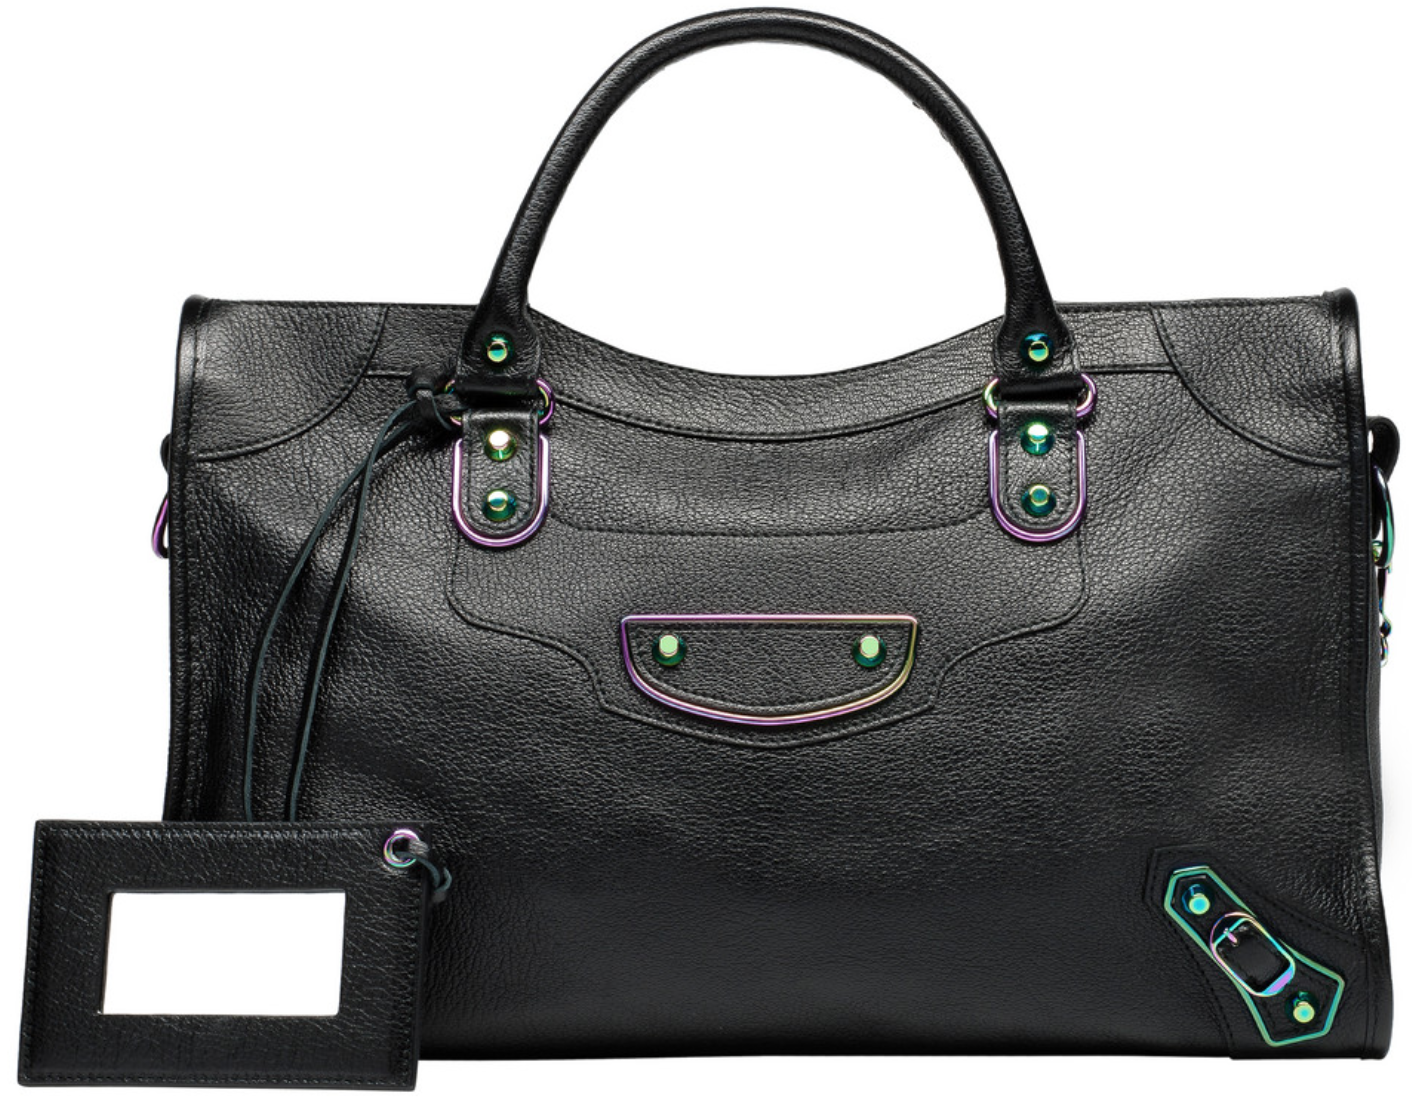 My Personal Thoughts On Balenciaga's Latest Iridescent Hardware ...